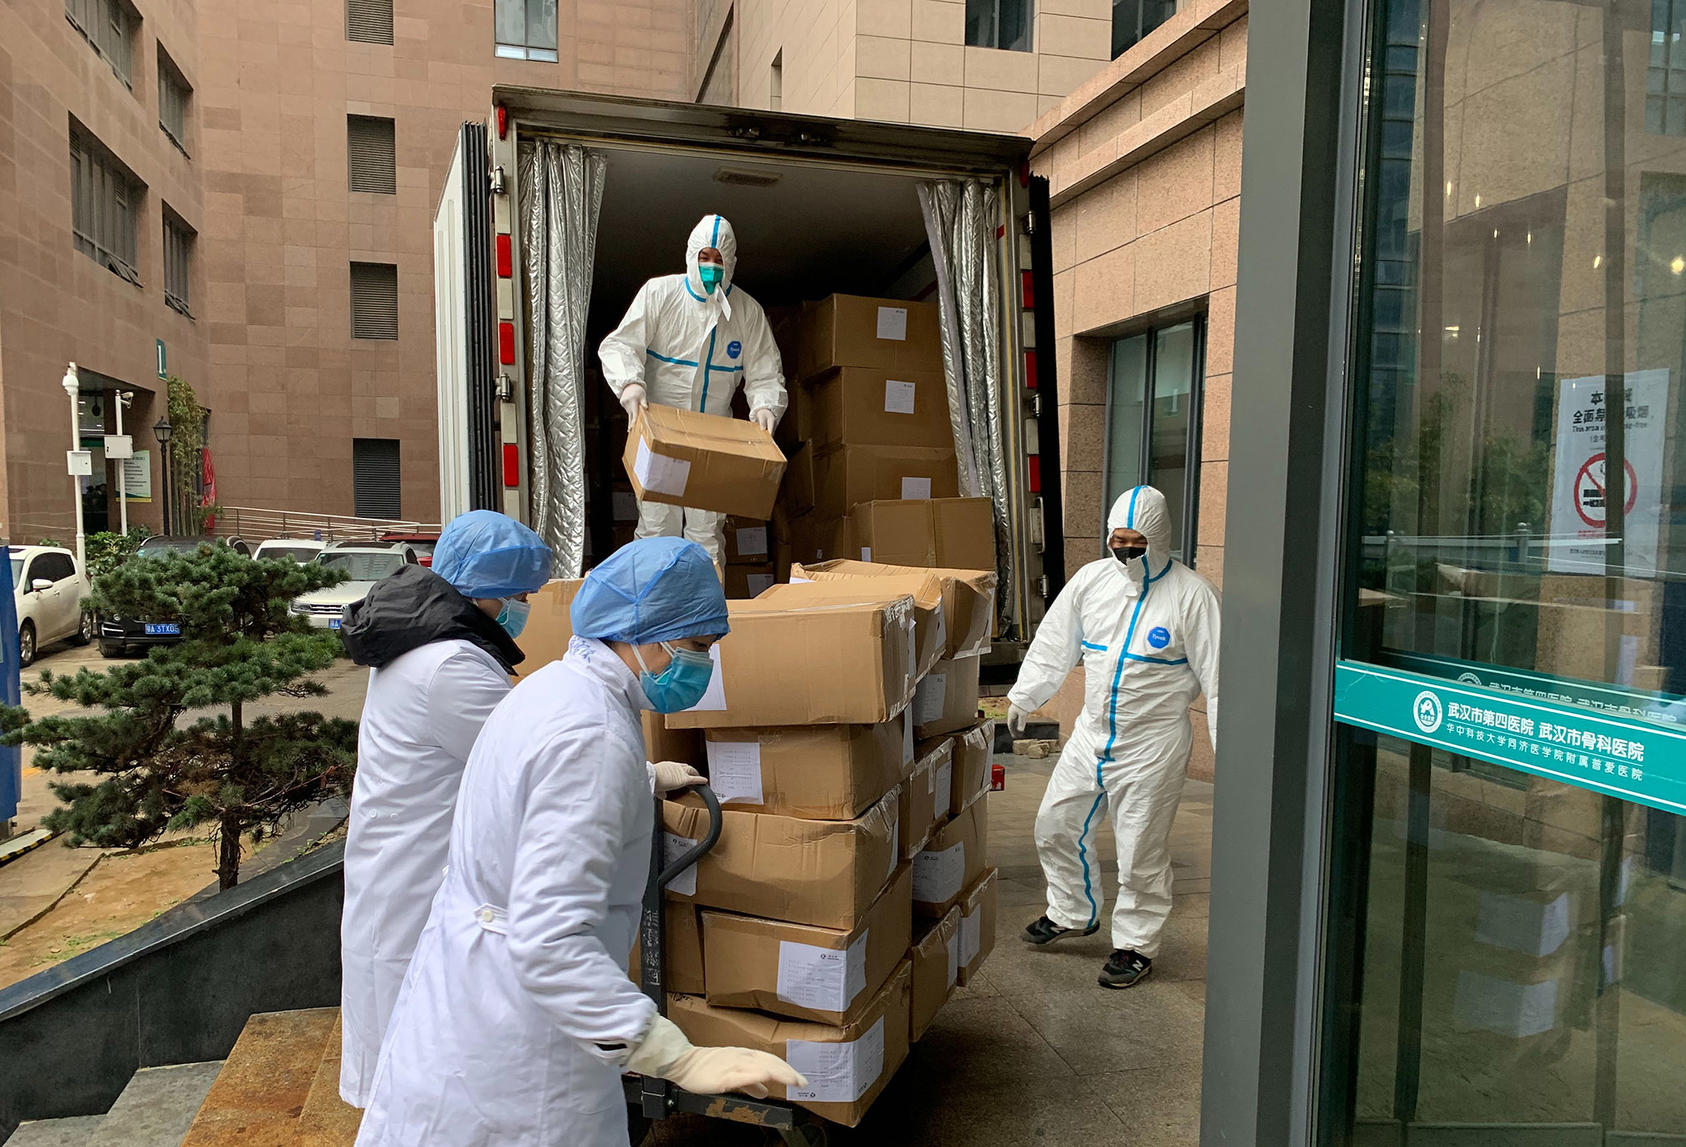 Workers unload shipments of medical gowns at a hospital in Wuhan, China on Jan. 24, 2020. (Chris Buckley/The New York Times)